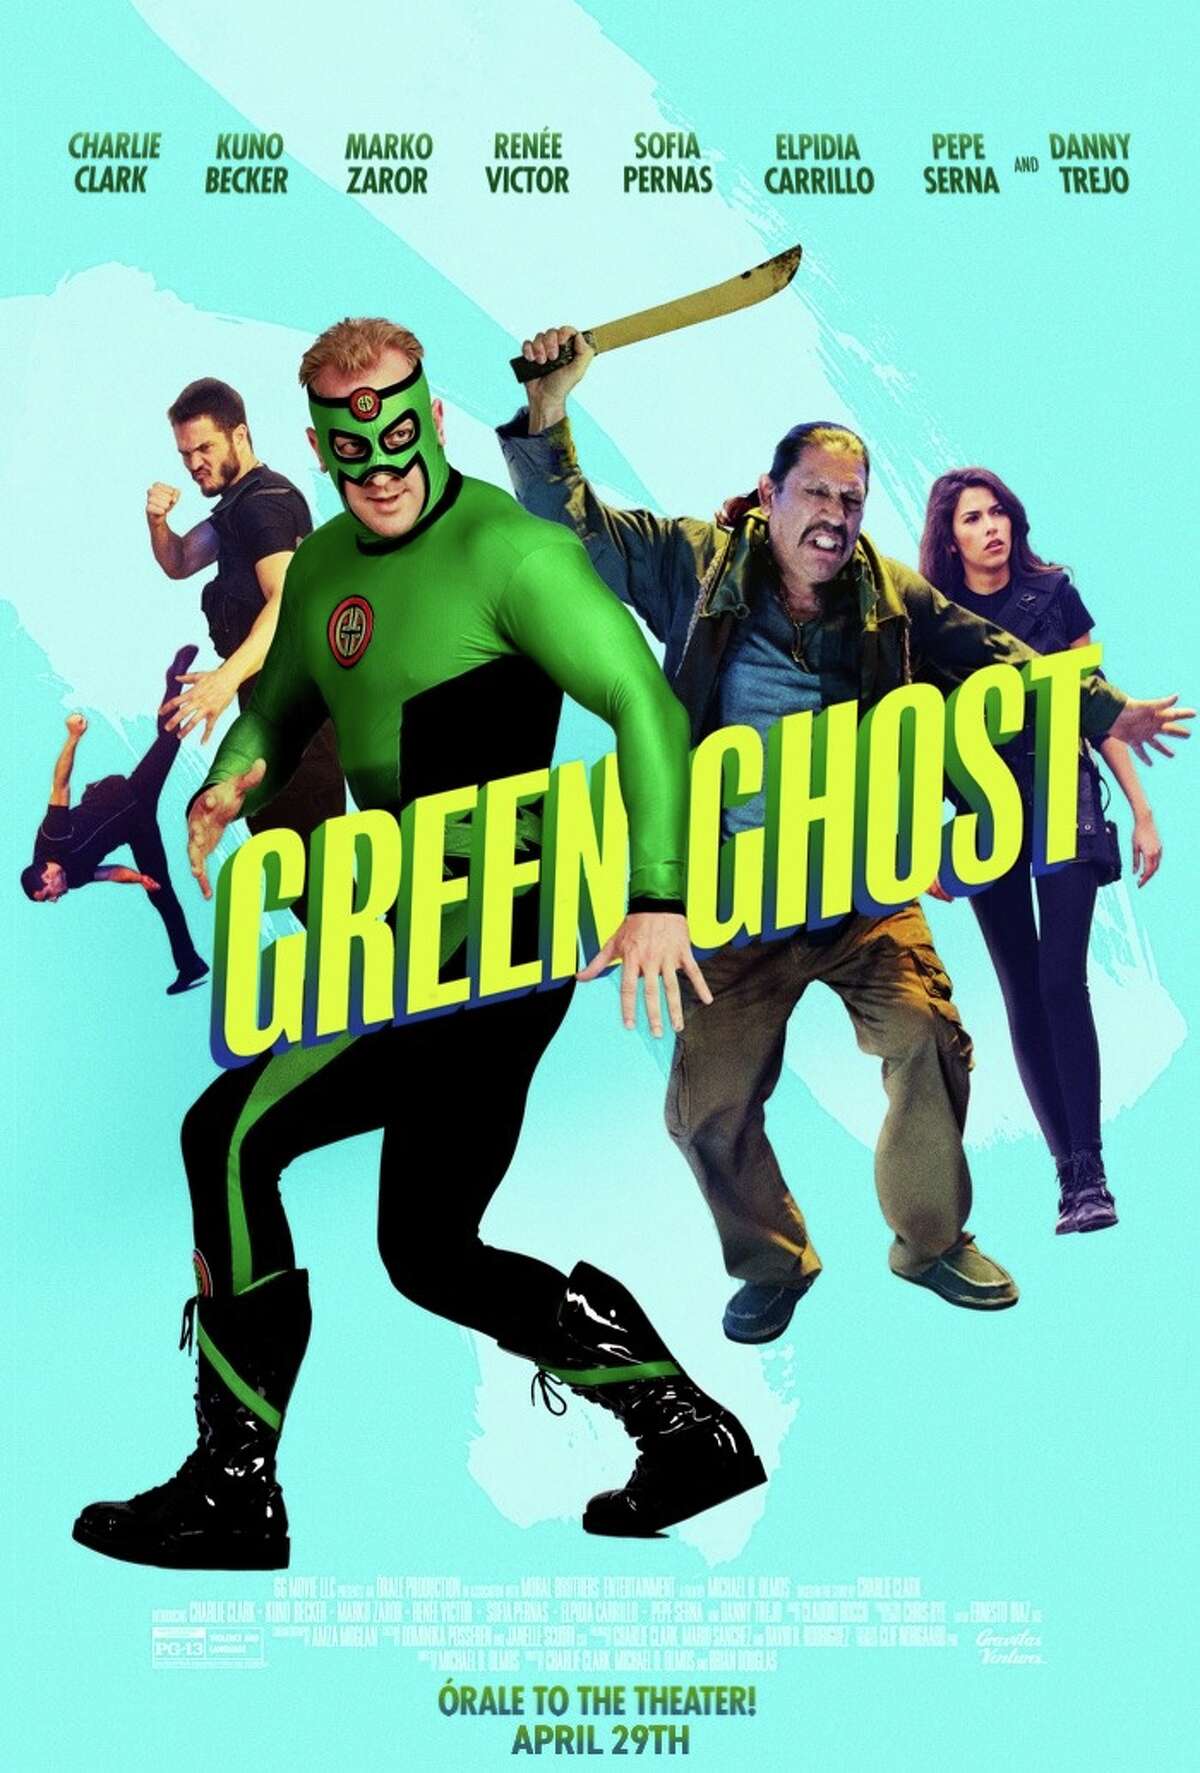 The poster for "Green Ghost and the Masters of the Stone." is shown.